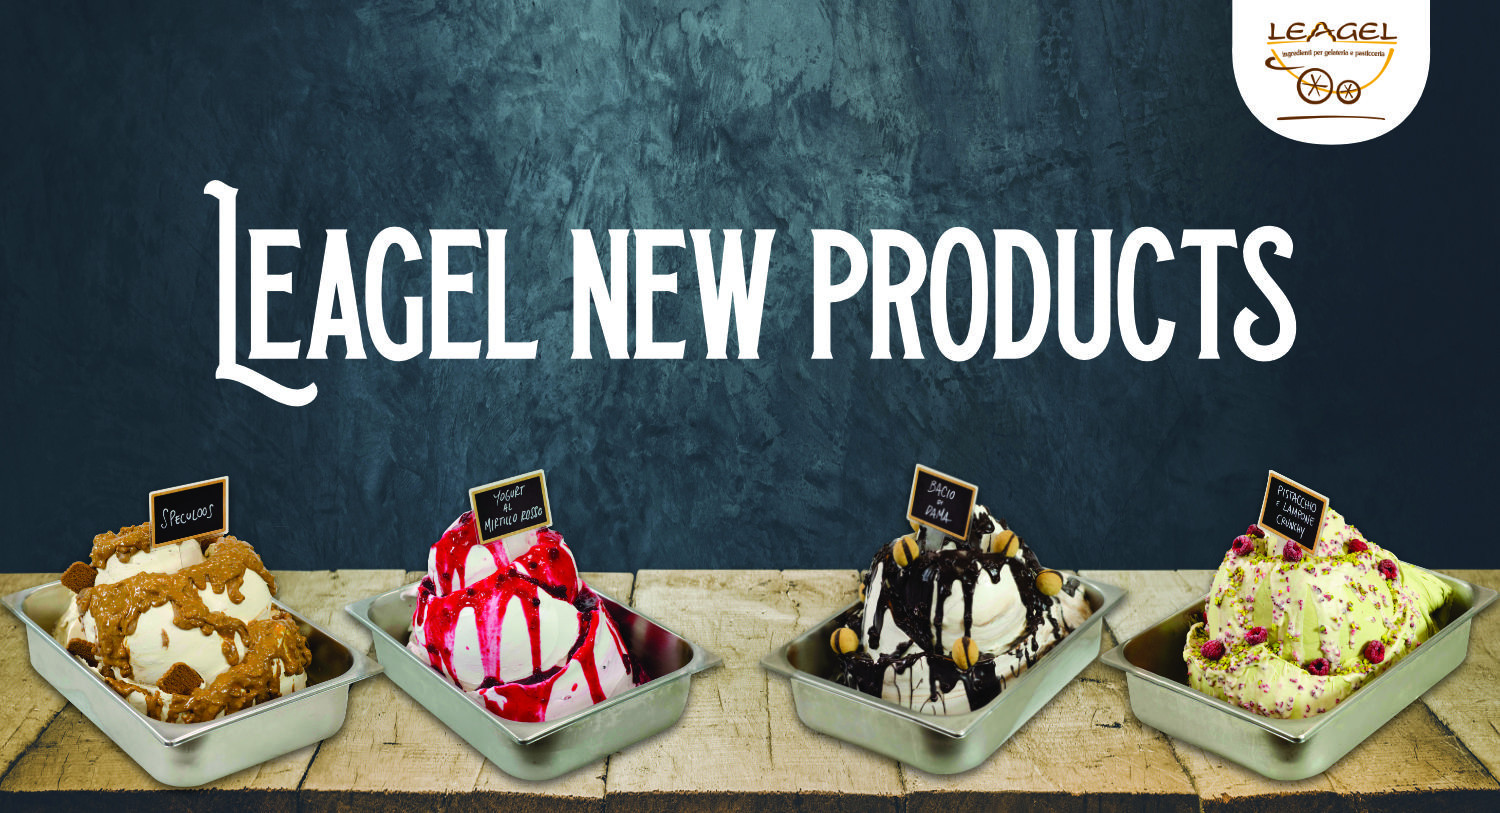 GELQ.IT PRESENTS THE LEAGEL PRODUCT NEWS for 2019